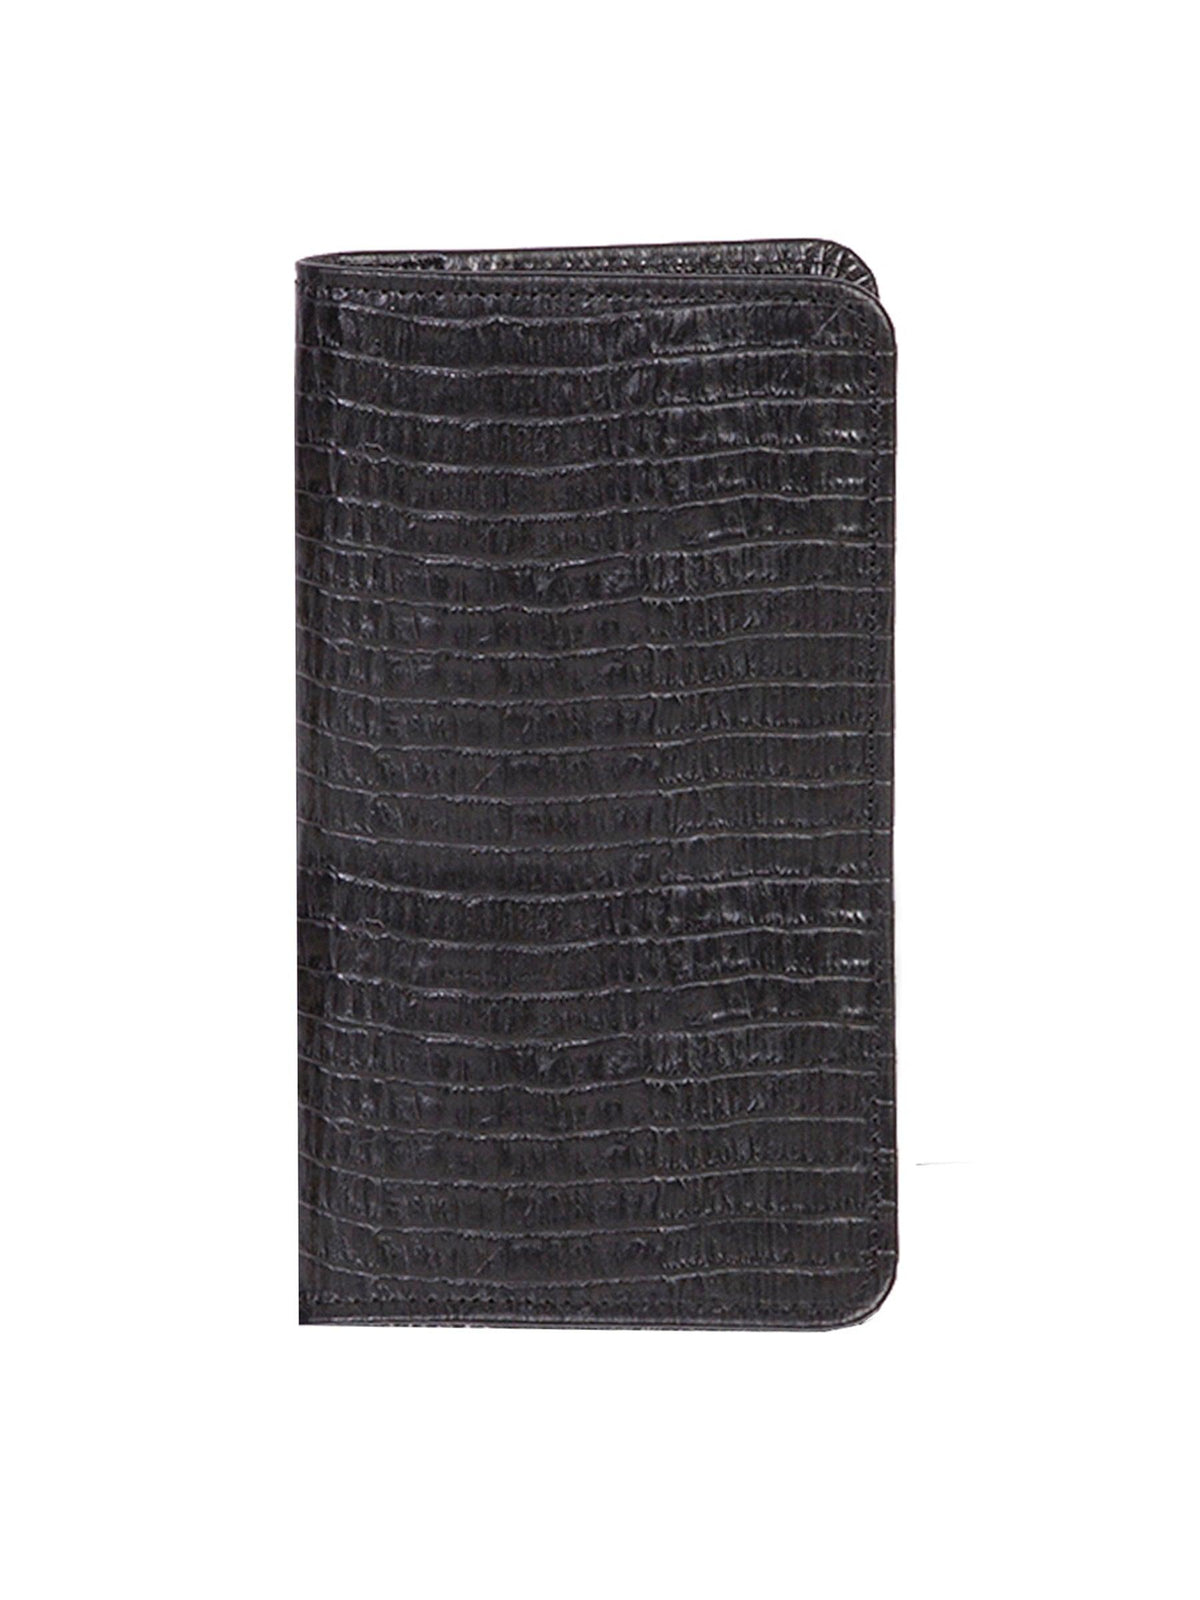 Scully Leather Black Lizard Leather Blank Pocket Notebook - Flyclothing LLC